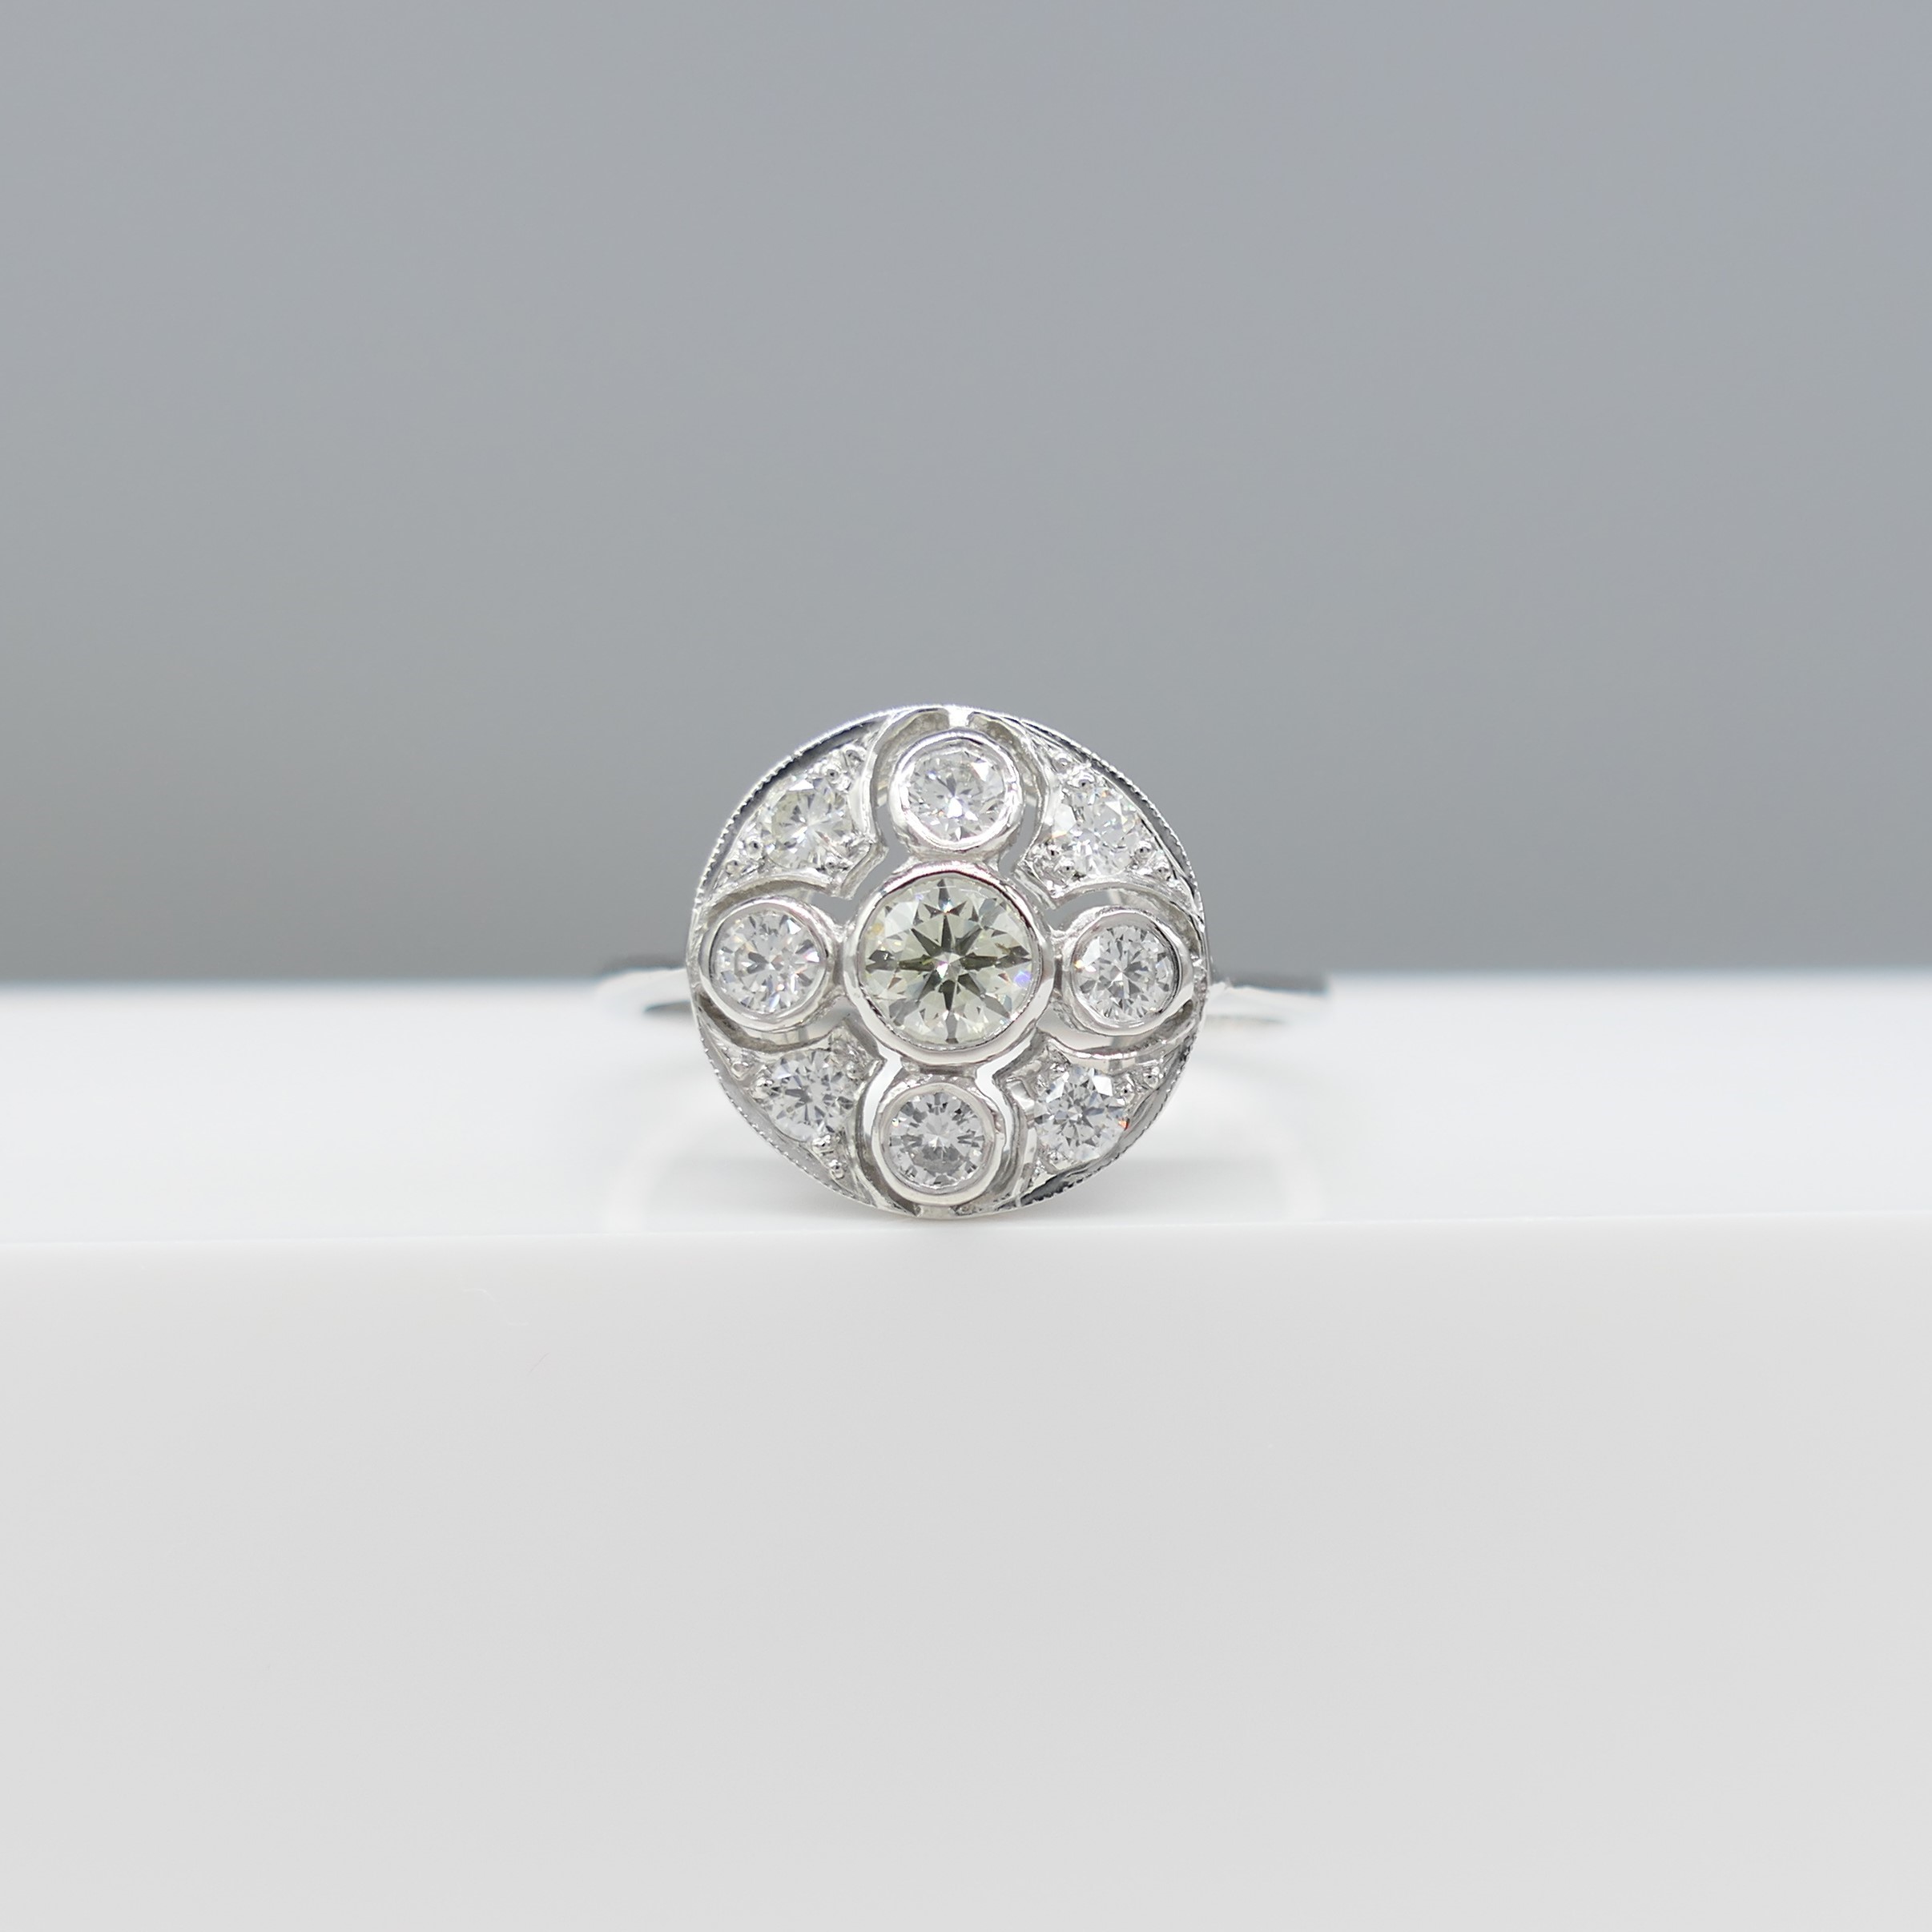 A Vintage-Style Platinum And 0.60Ct Diamond Cluster Ring - Image 5 of 8